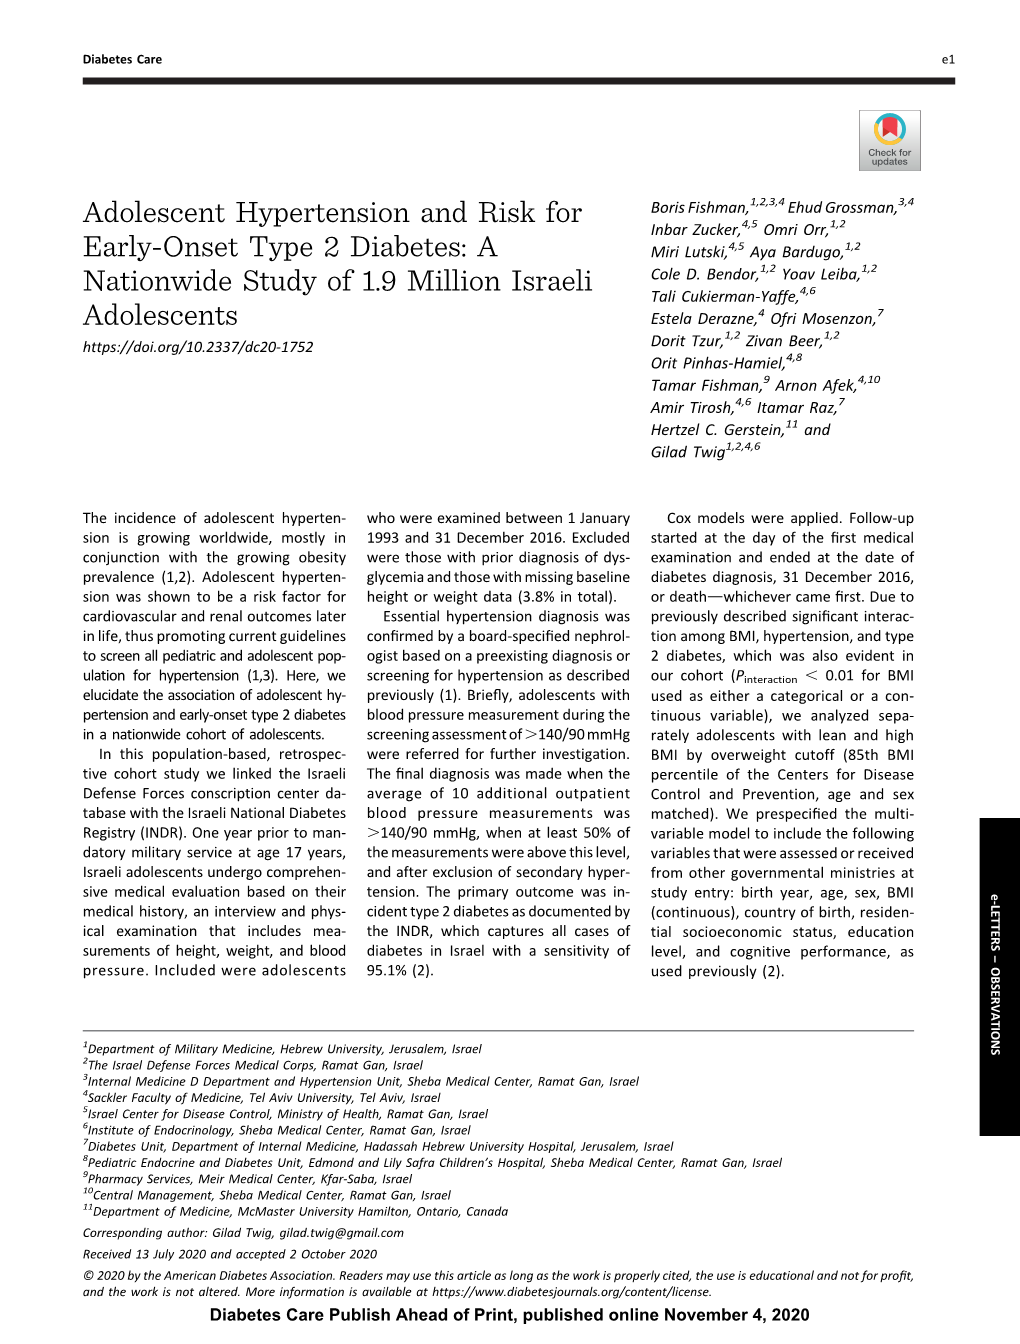 Adolescent Hypertension and Risk for Early-Onset Type 2